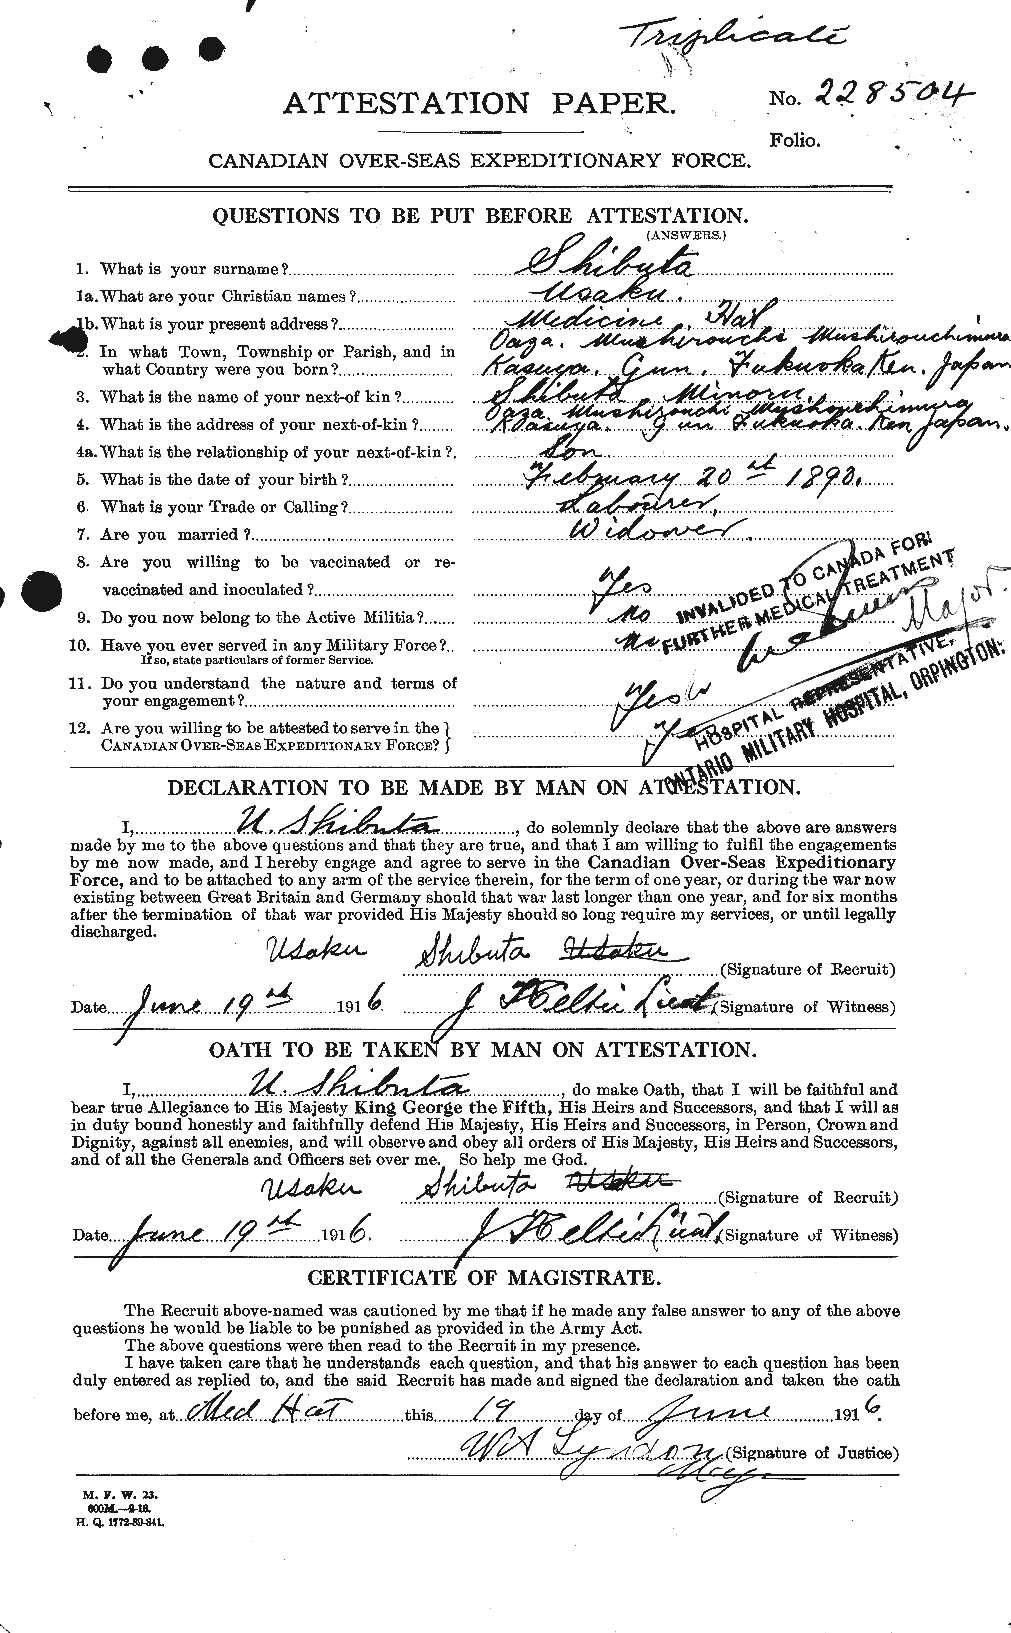 Personnel Records of the First World War - CEF 090638a